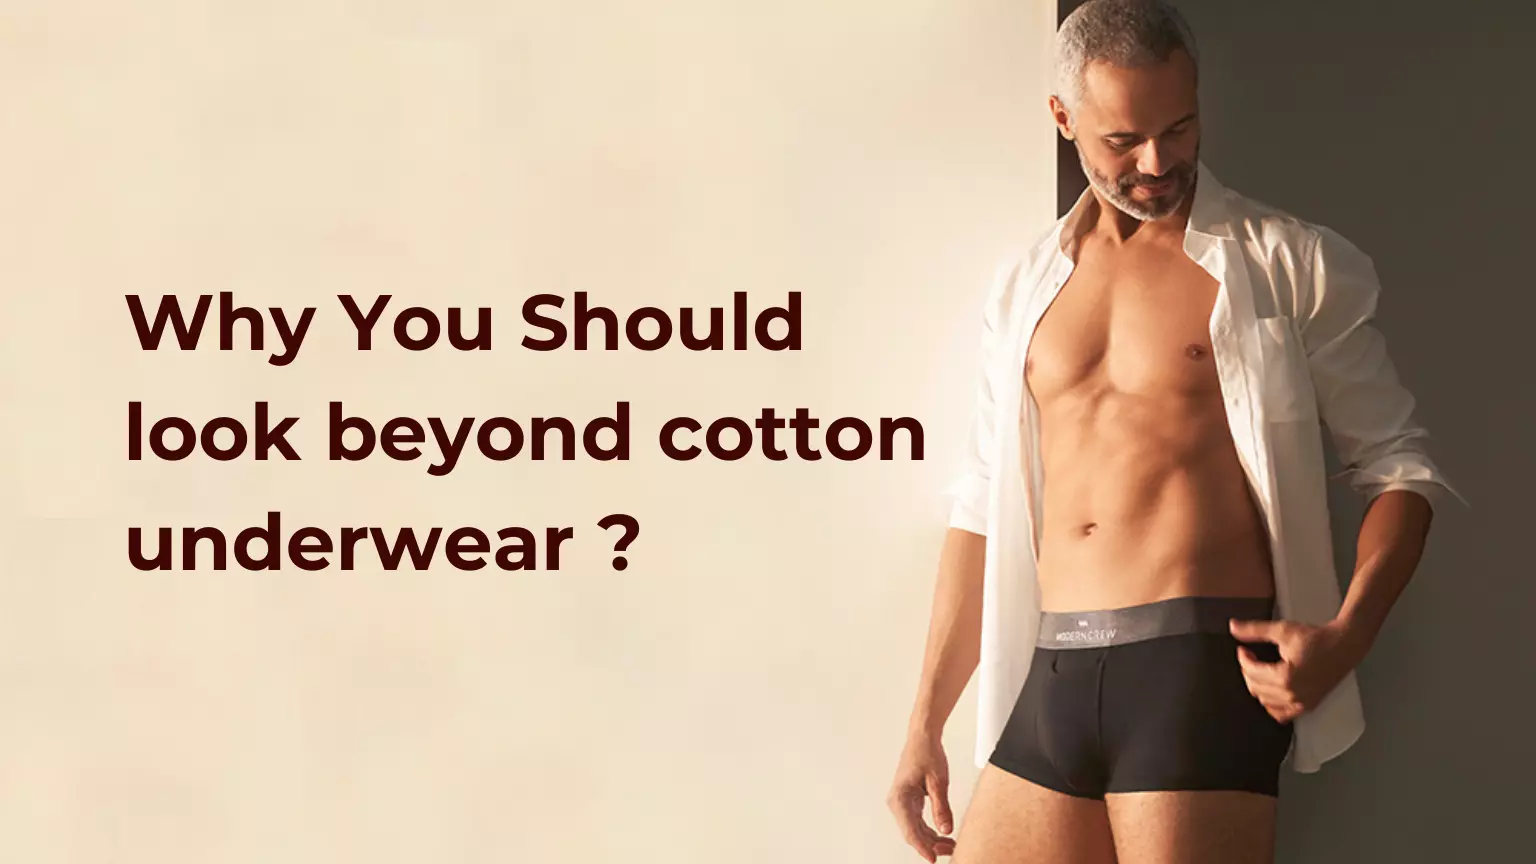 What's the best material for men's underwear?